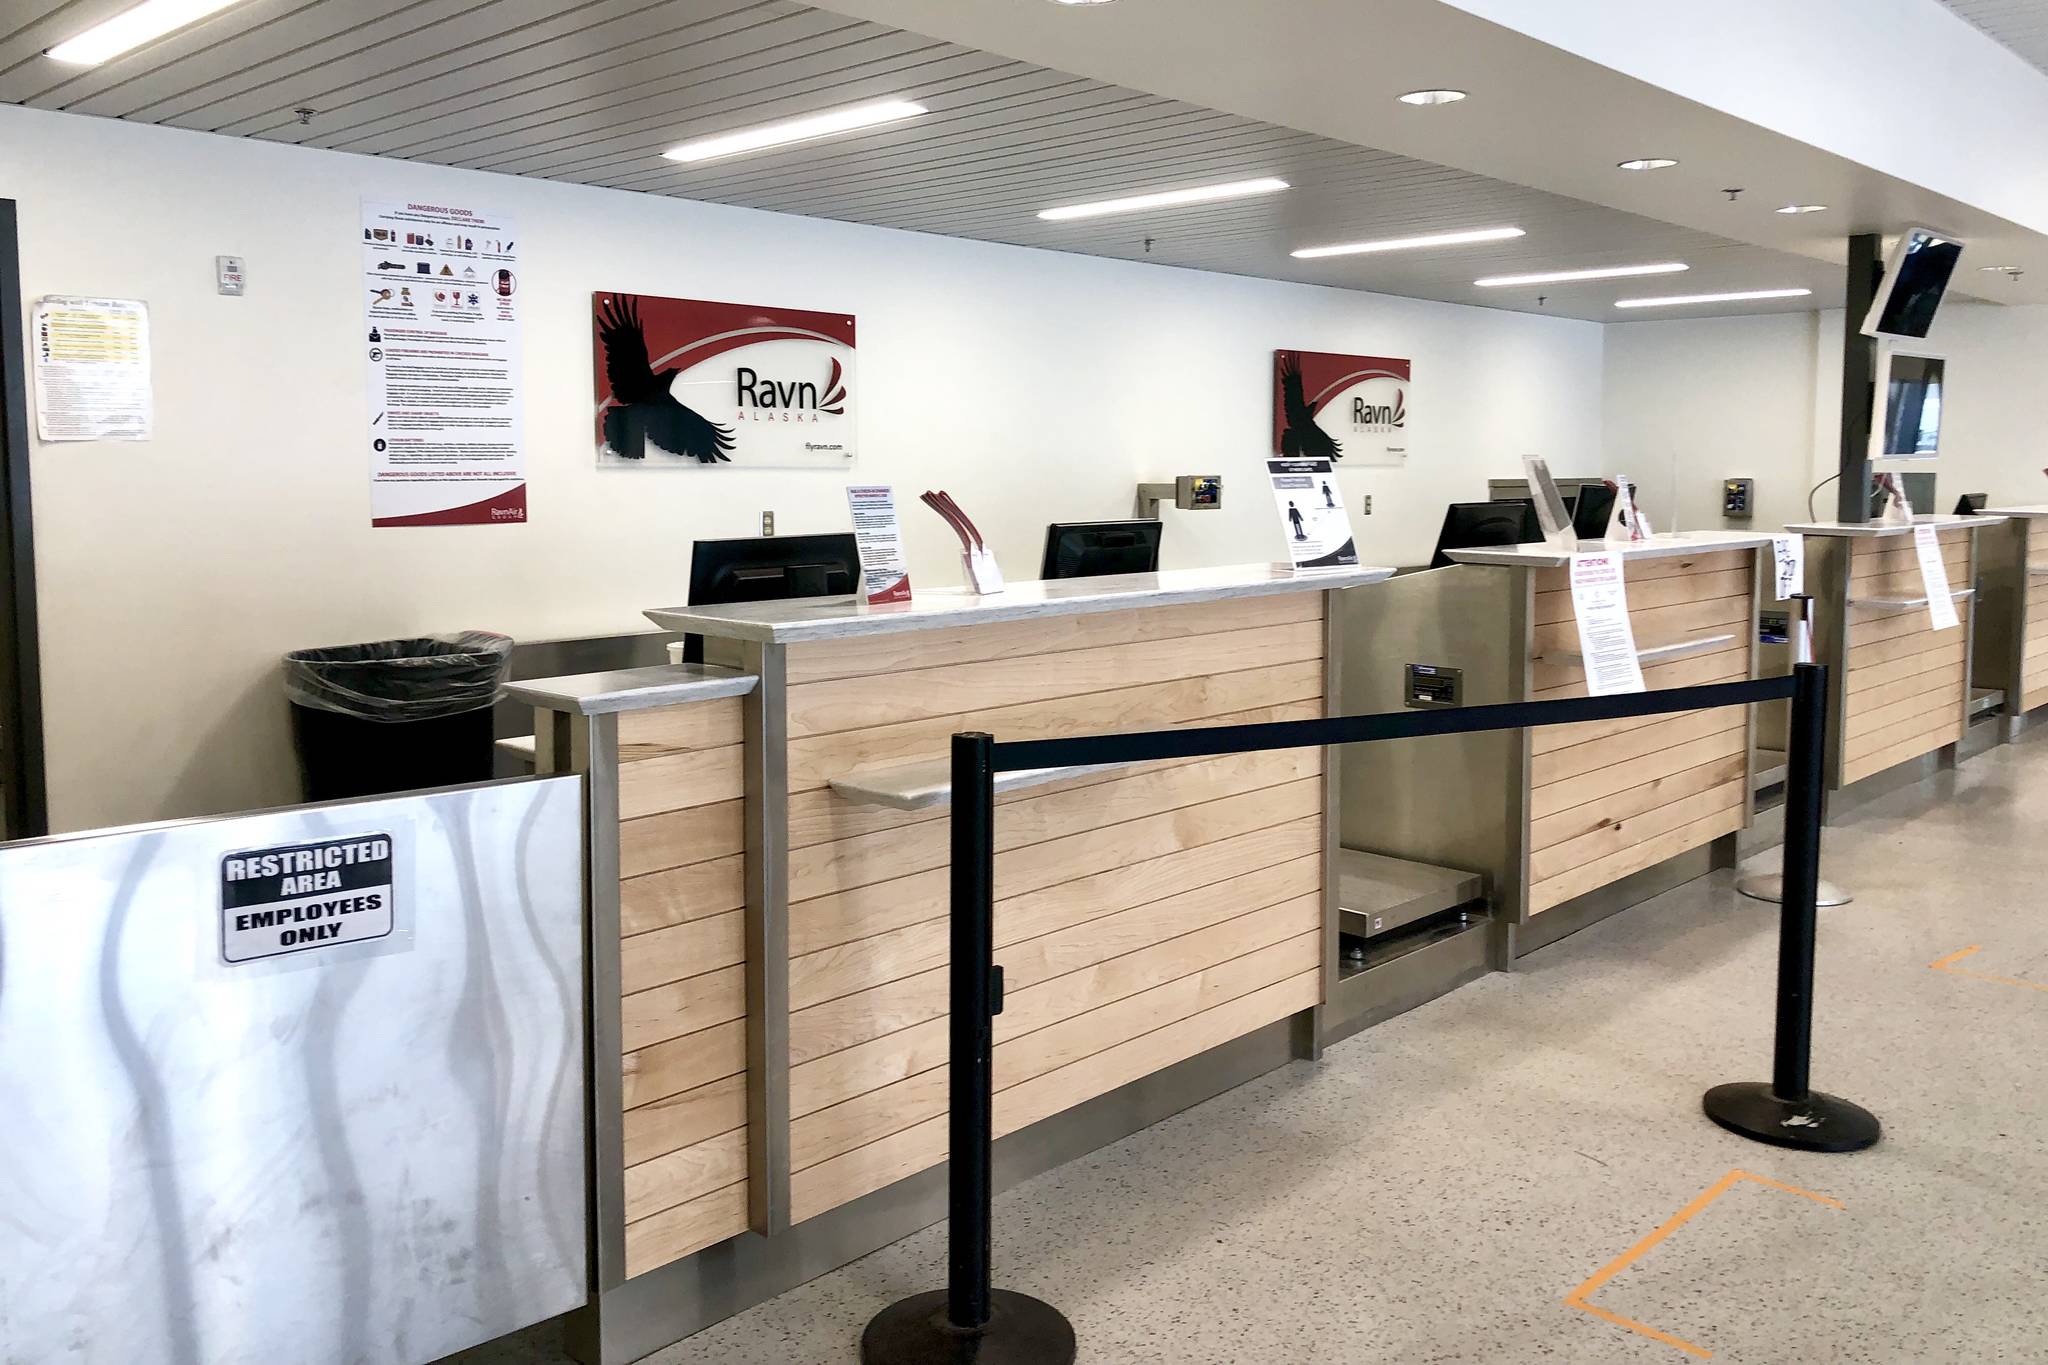 The RavnAir kiosk stands empty at the Kenai Airport on Thursday, April 2, 2020. The company announced Thursday they were cutting all service by 90%. (Photo by Victoria Petersen/Peninsula Clarion)